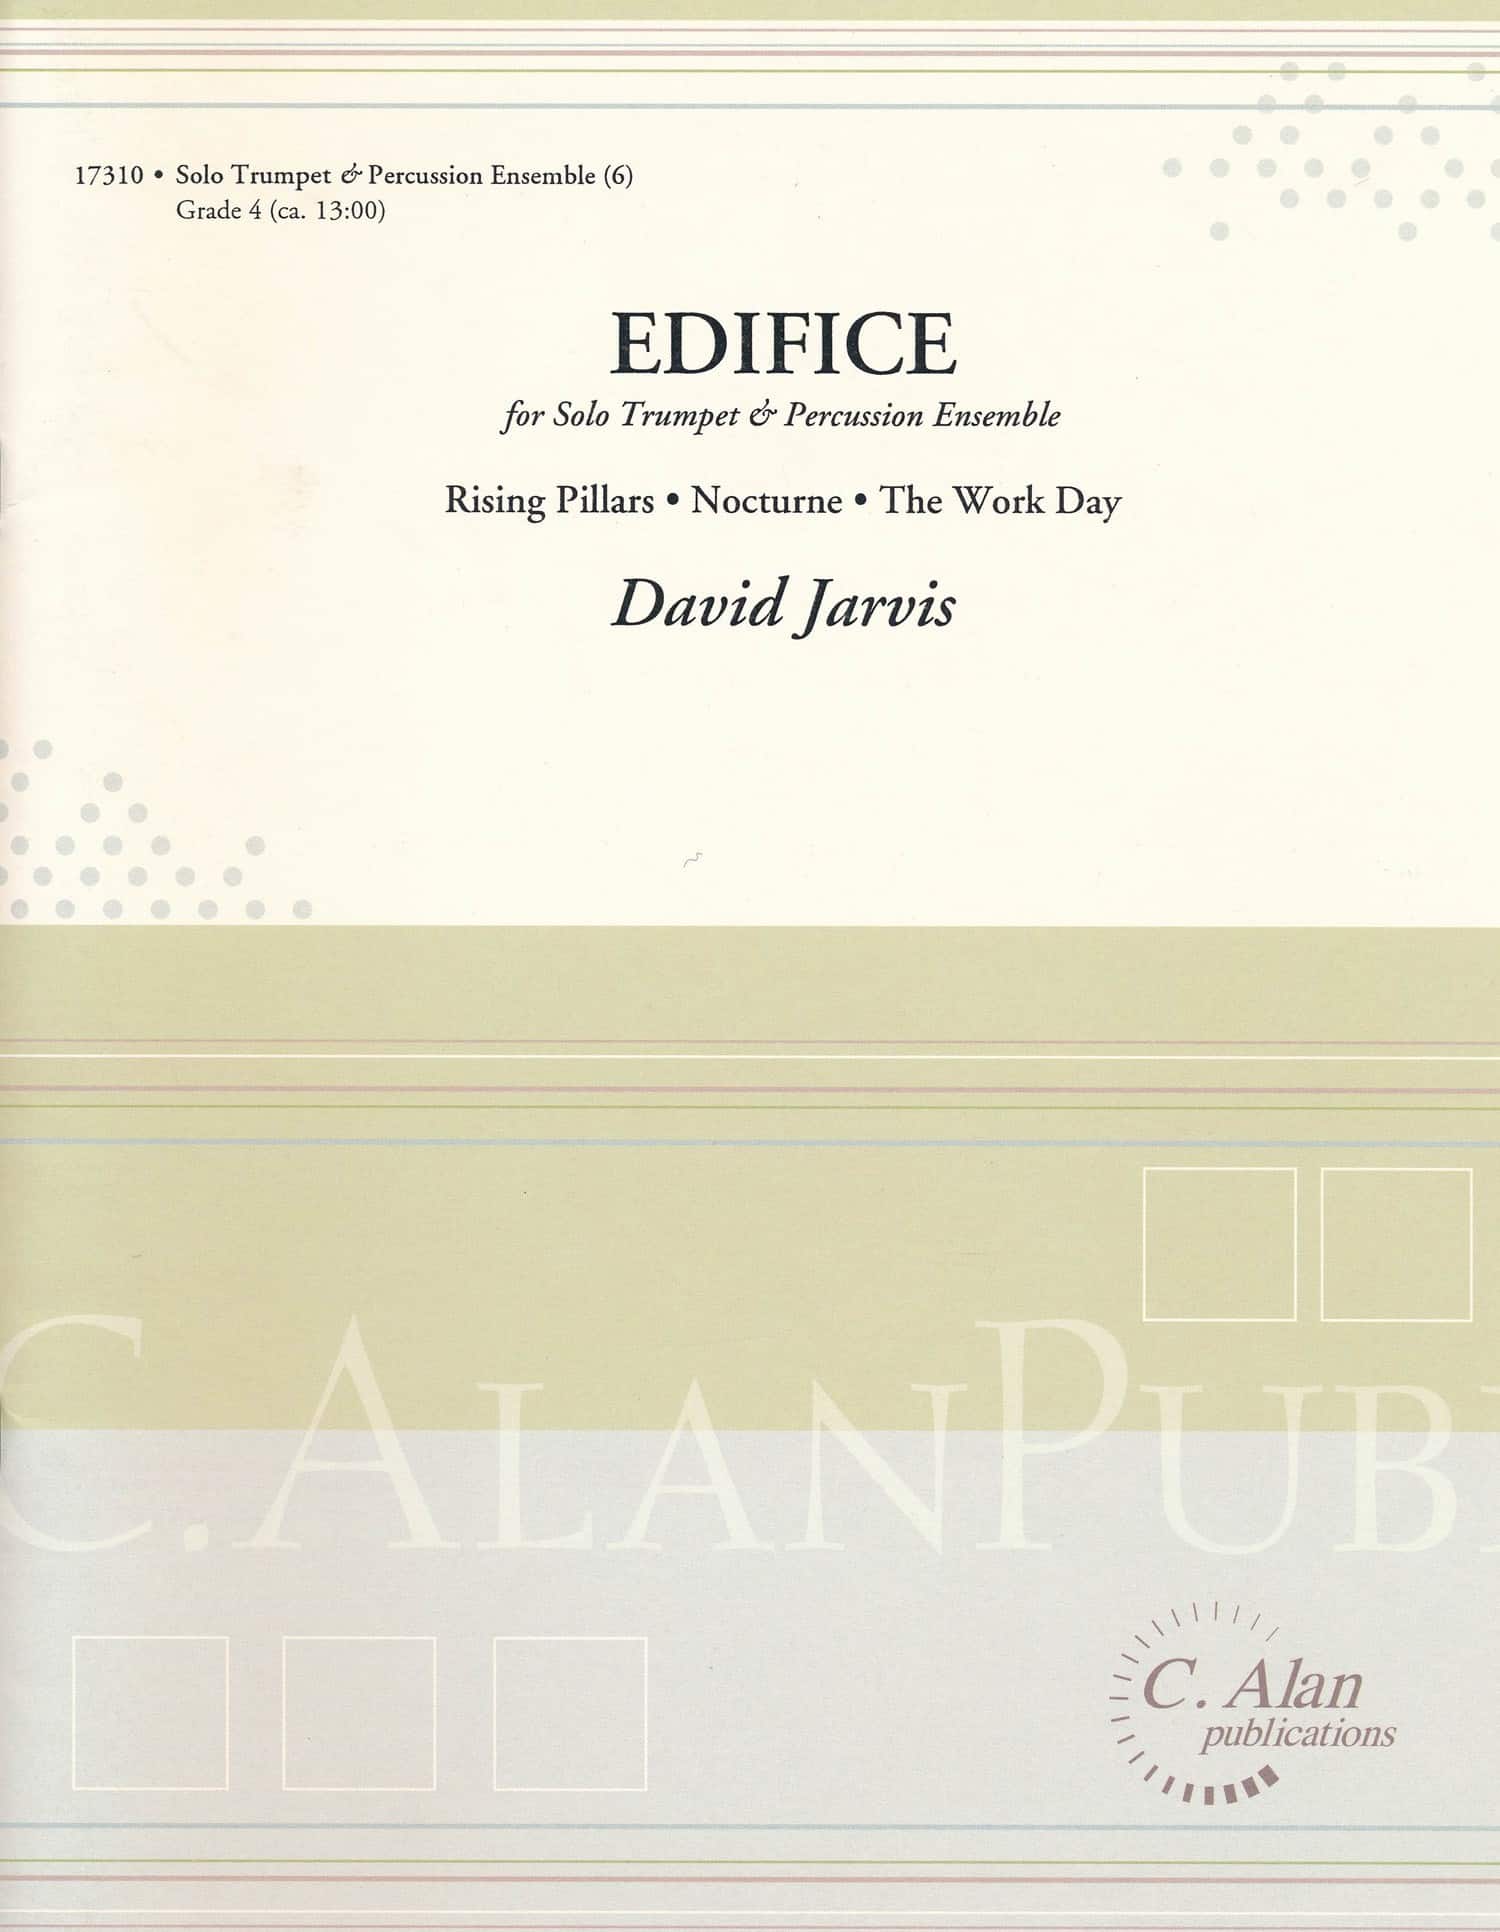 Edifice for Solo Trumpet and Percussion Ensemble by David Jarvis